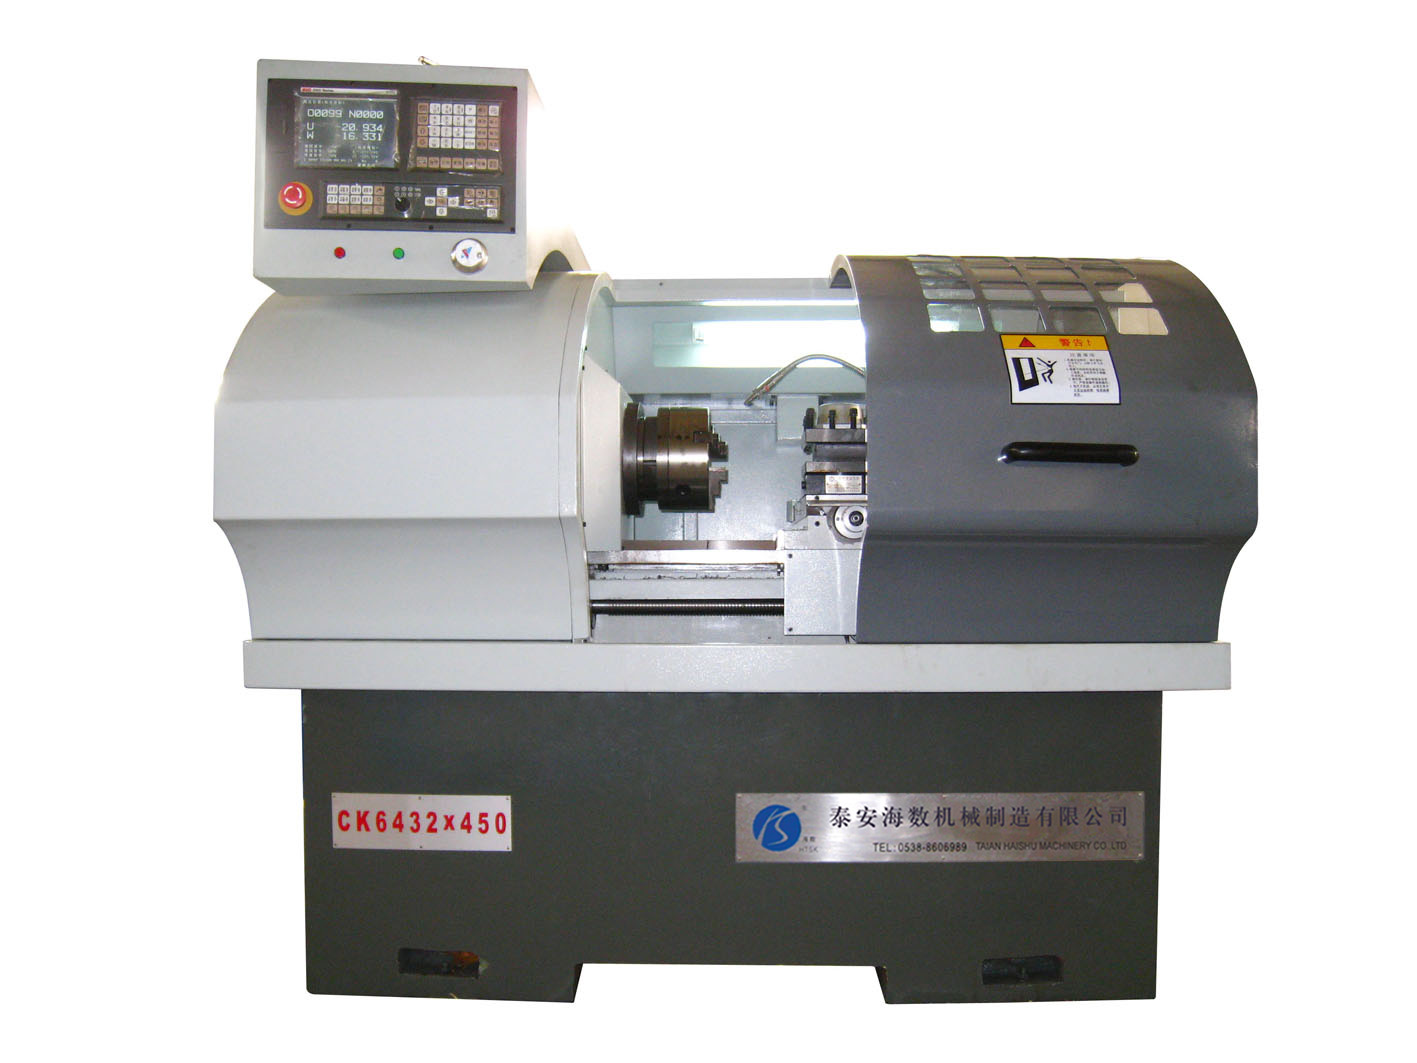 The type and model of horizontal CNC lathe